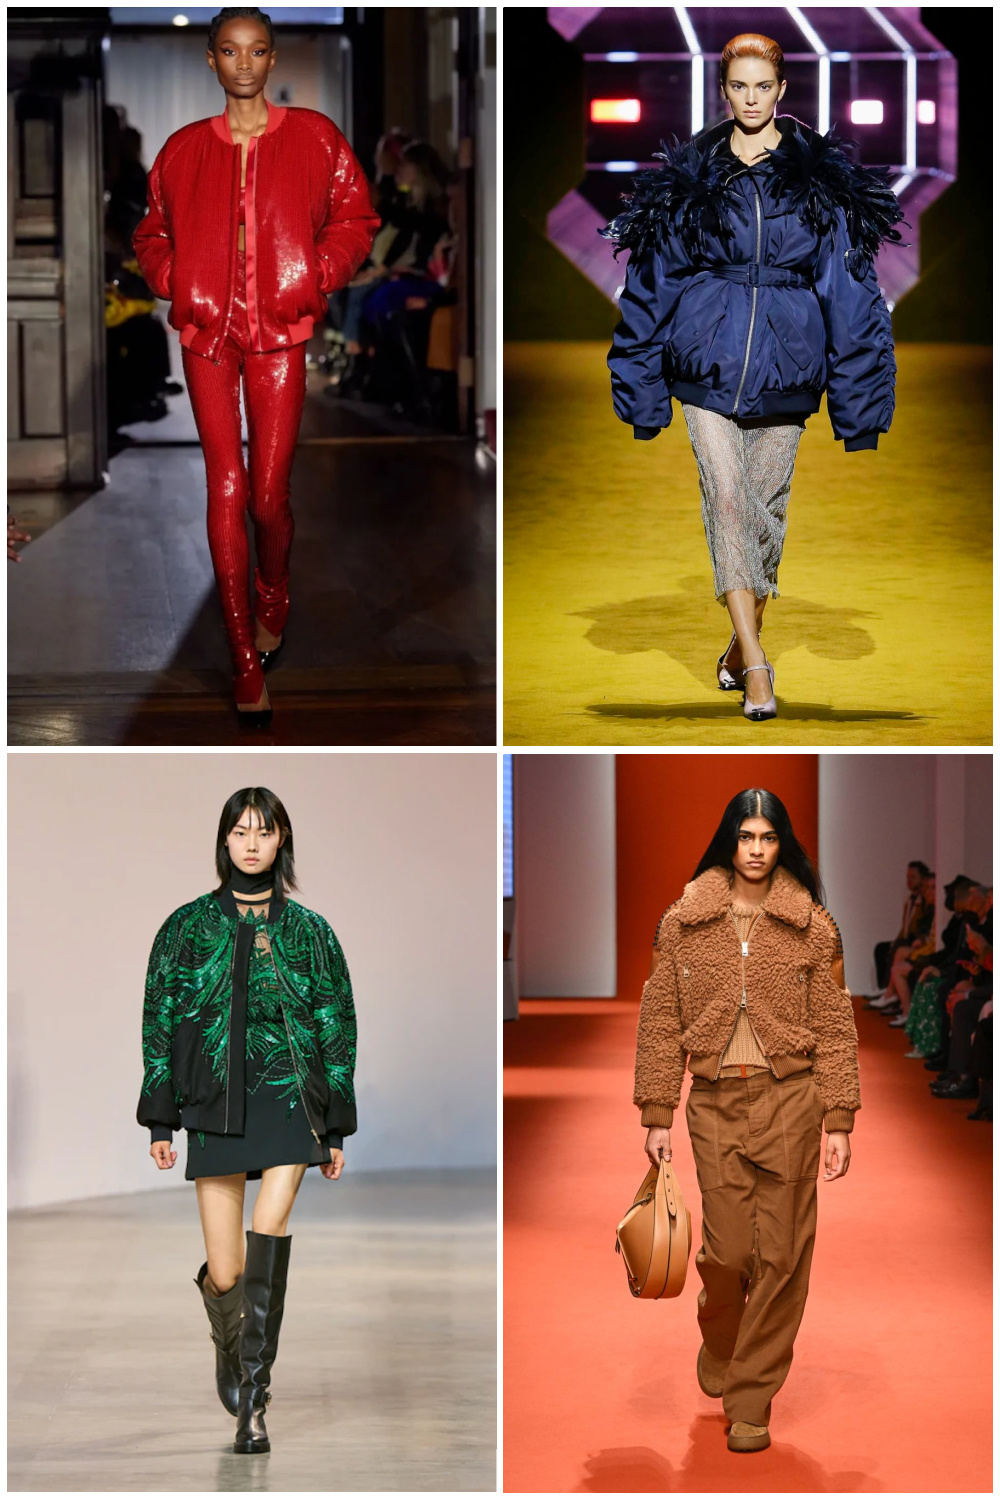 Fall-Winter 2022/2023 - Trendy Colors to Keep in Mind